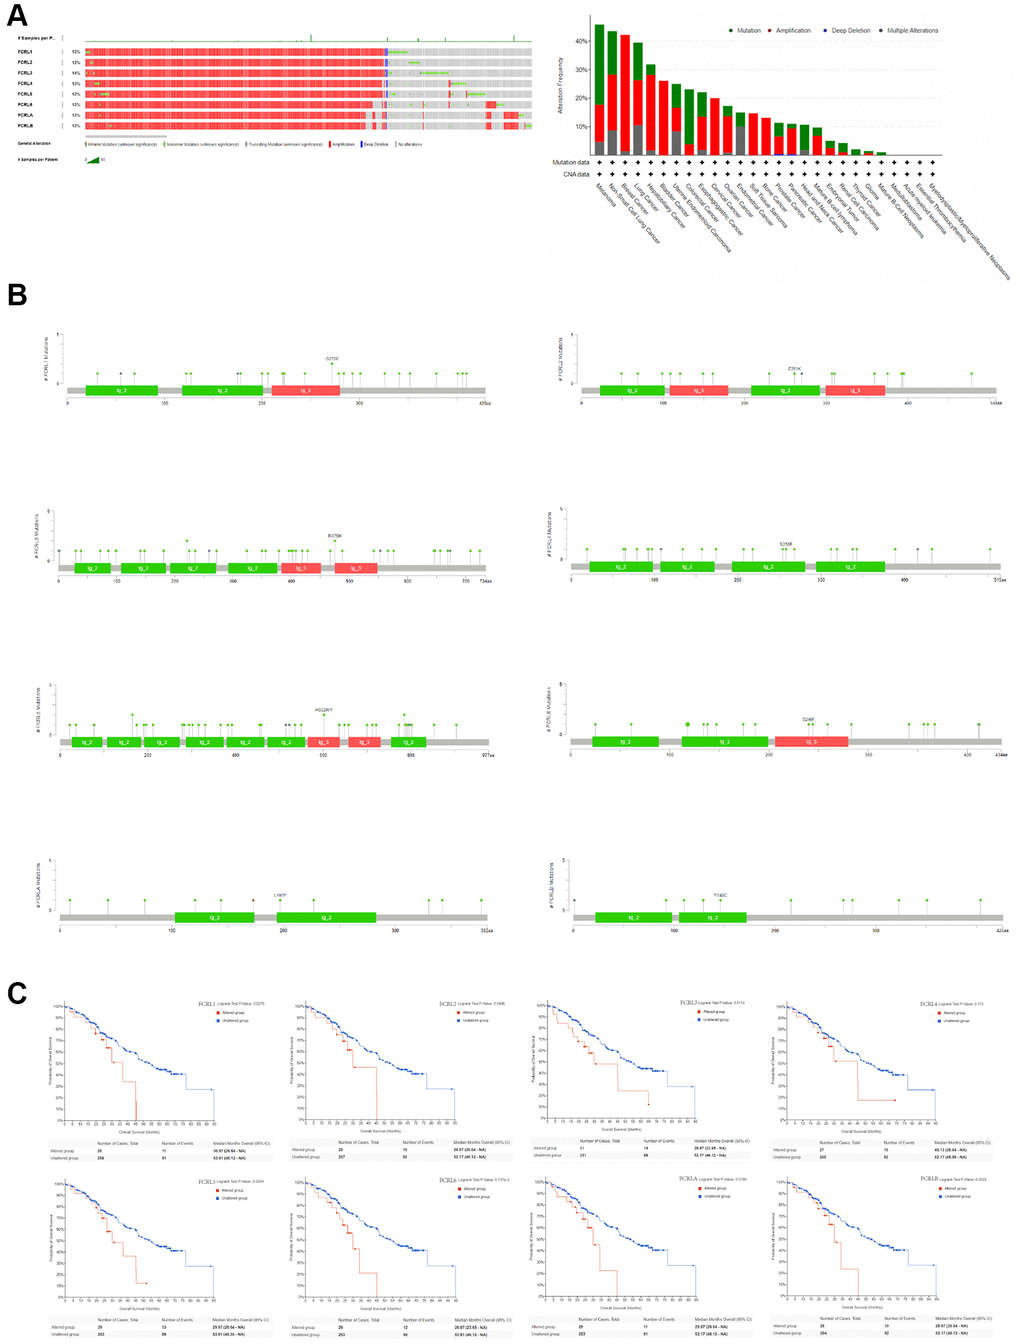 Genetic alteration of FCRL family gene. (A) Bar chart of FCRL family gene mutation in pan-cancer based on ICGC/TCGA database, and the alteration frequency with different types of FCRL family gene mutations in pan-cancer. (B) Mutation diagram of FCRL family gene across protein domains. (C) Survival analysis of OS based on altered and unaltered FCRL family gene.